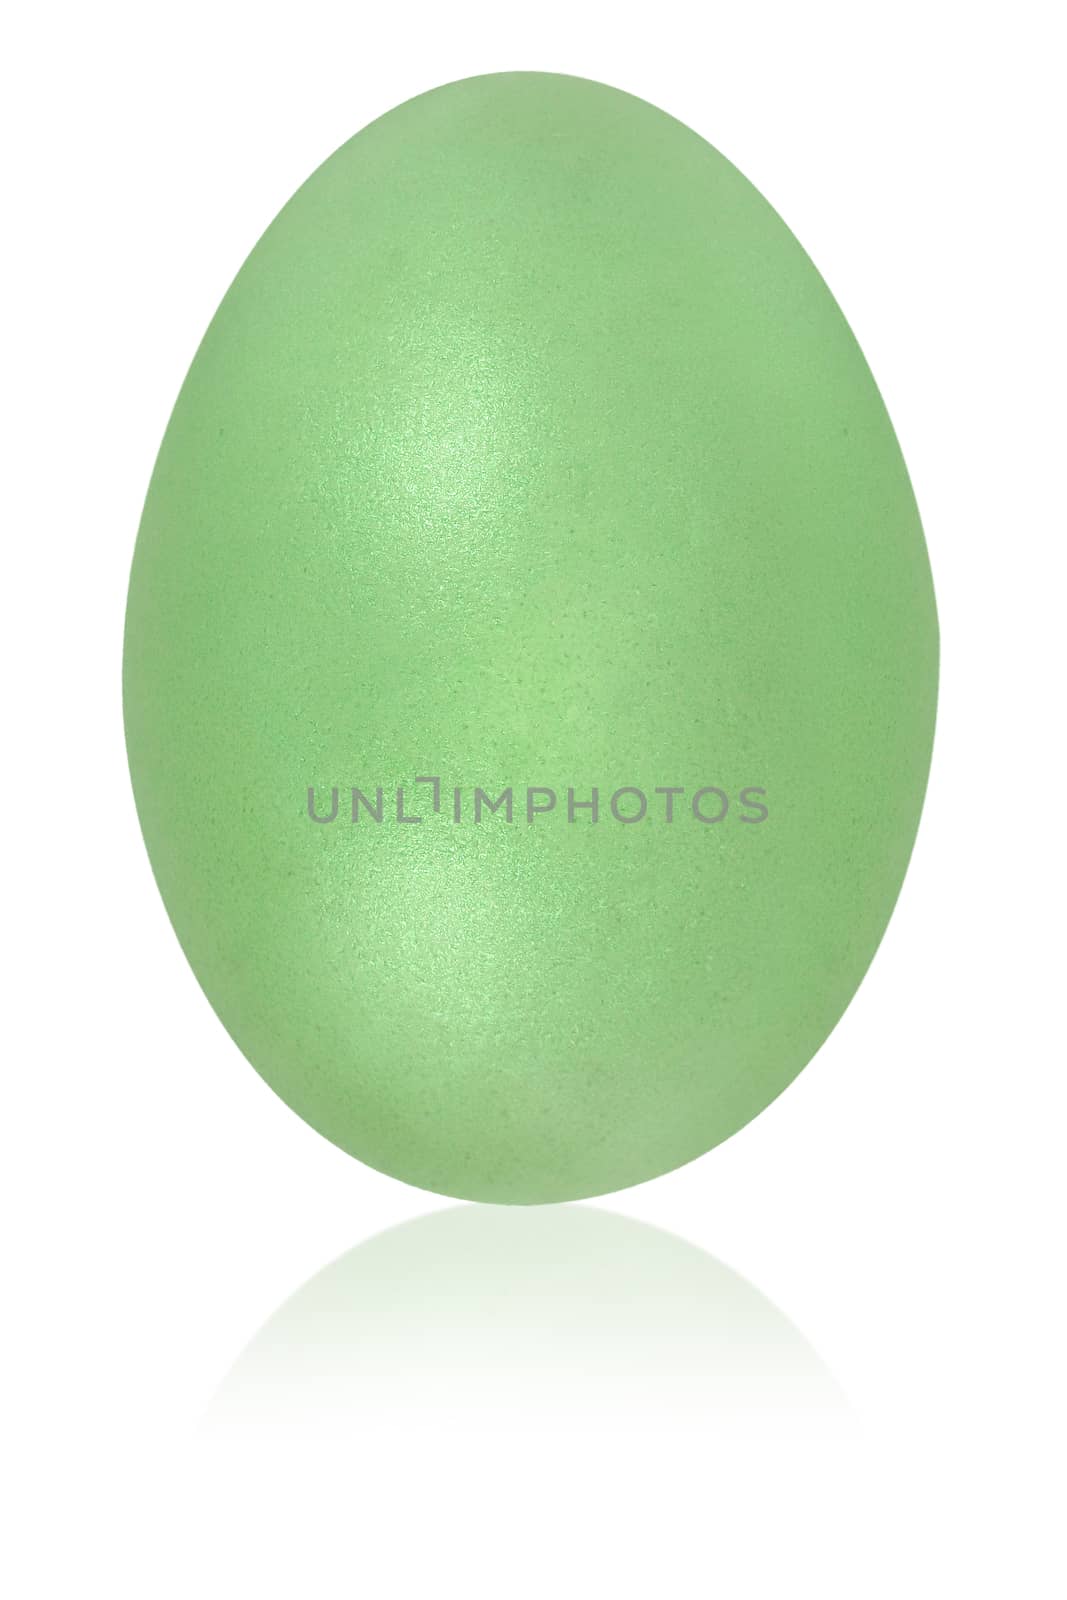 pale green egg by fadeinphotography